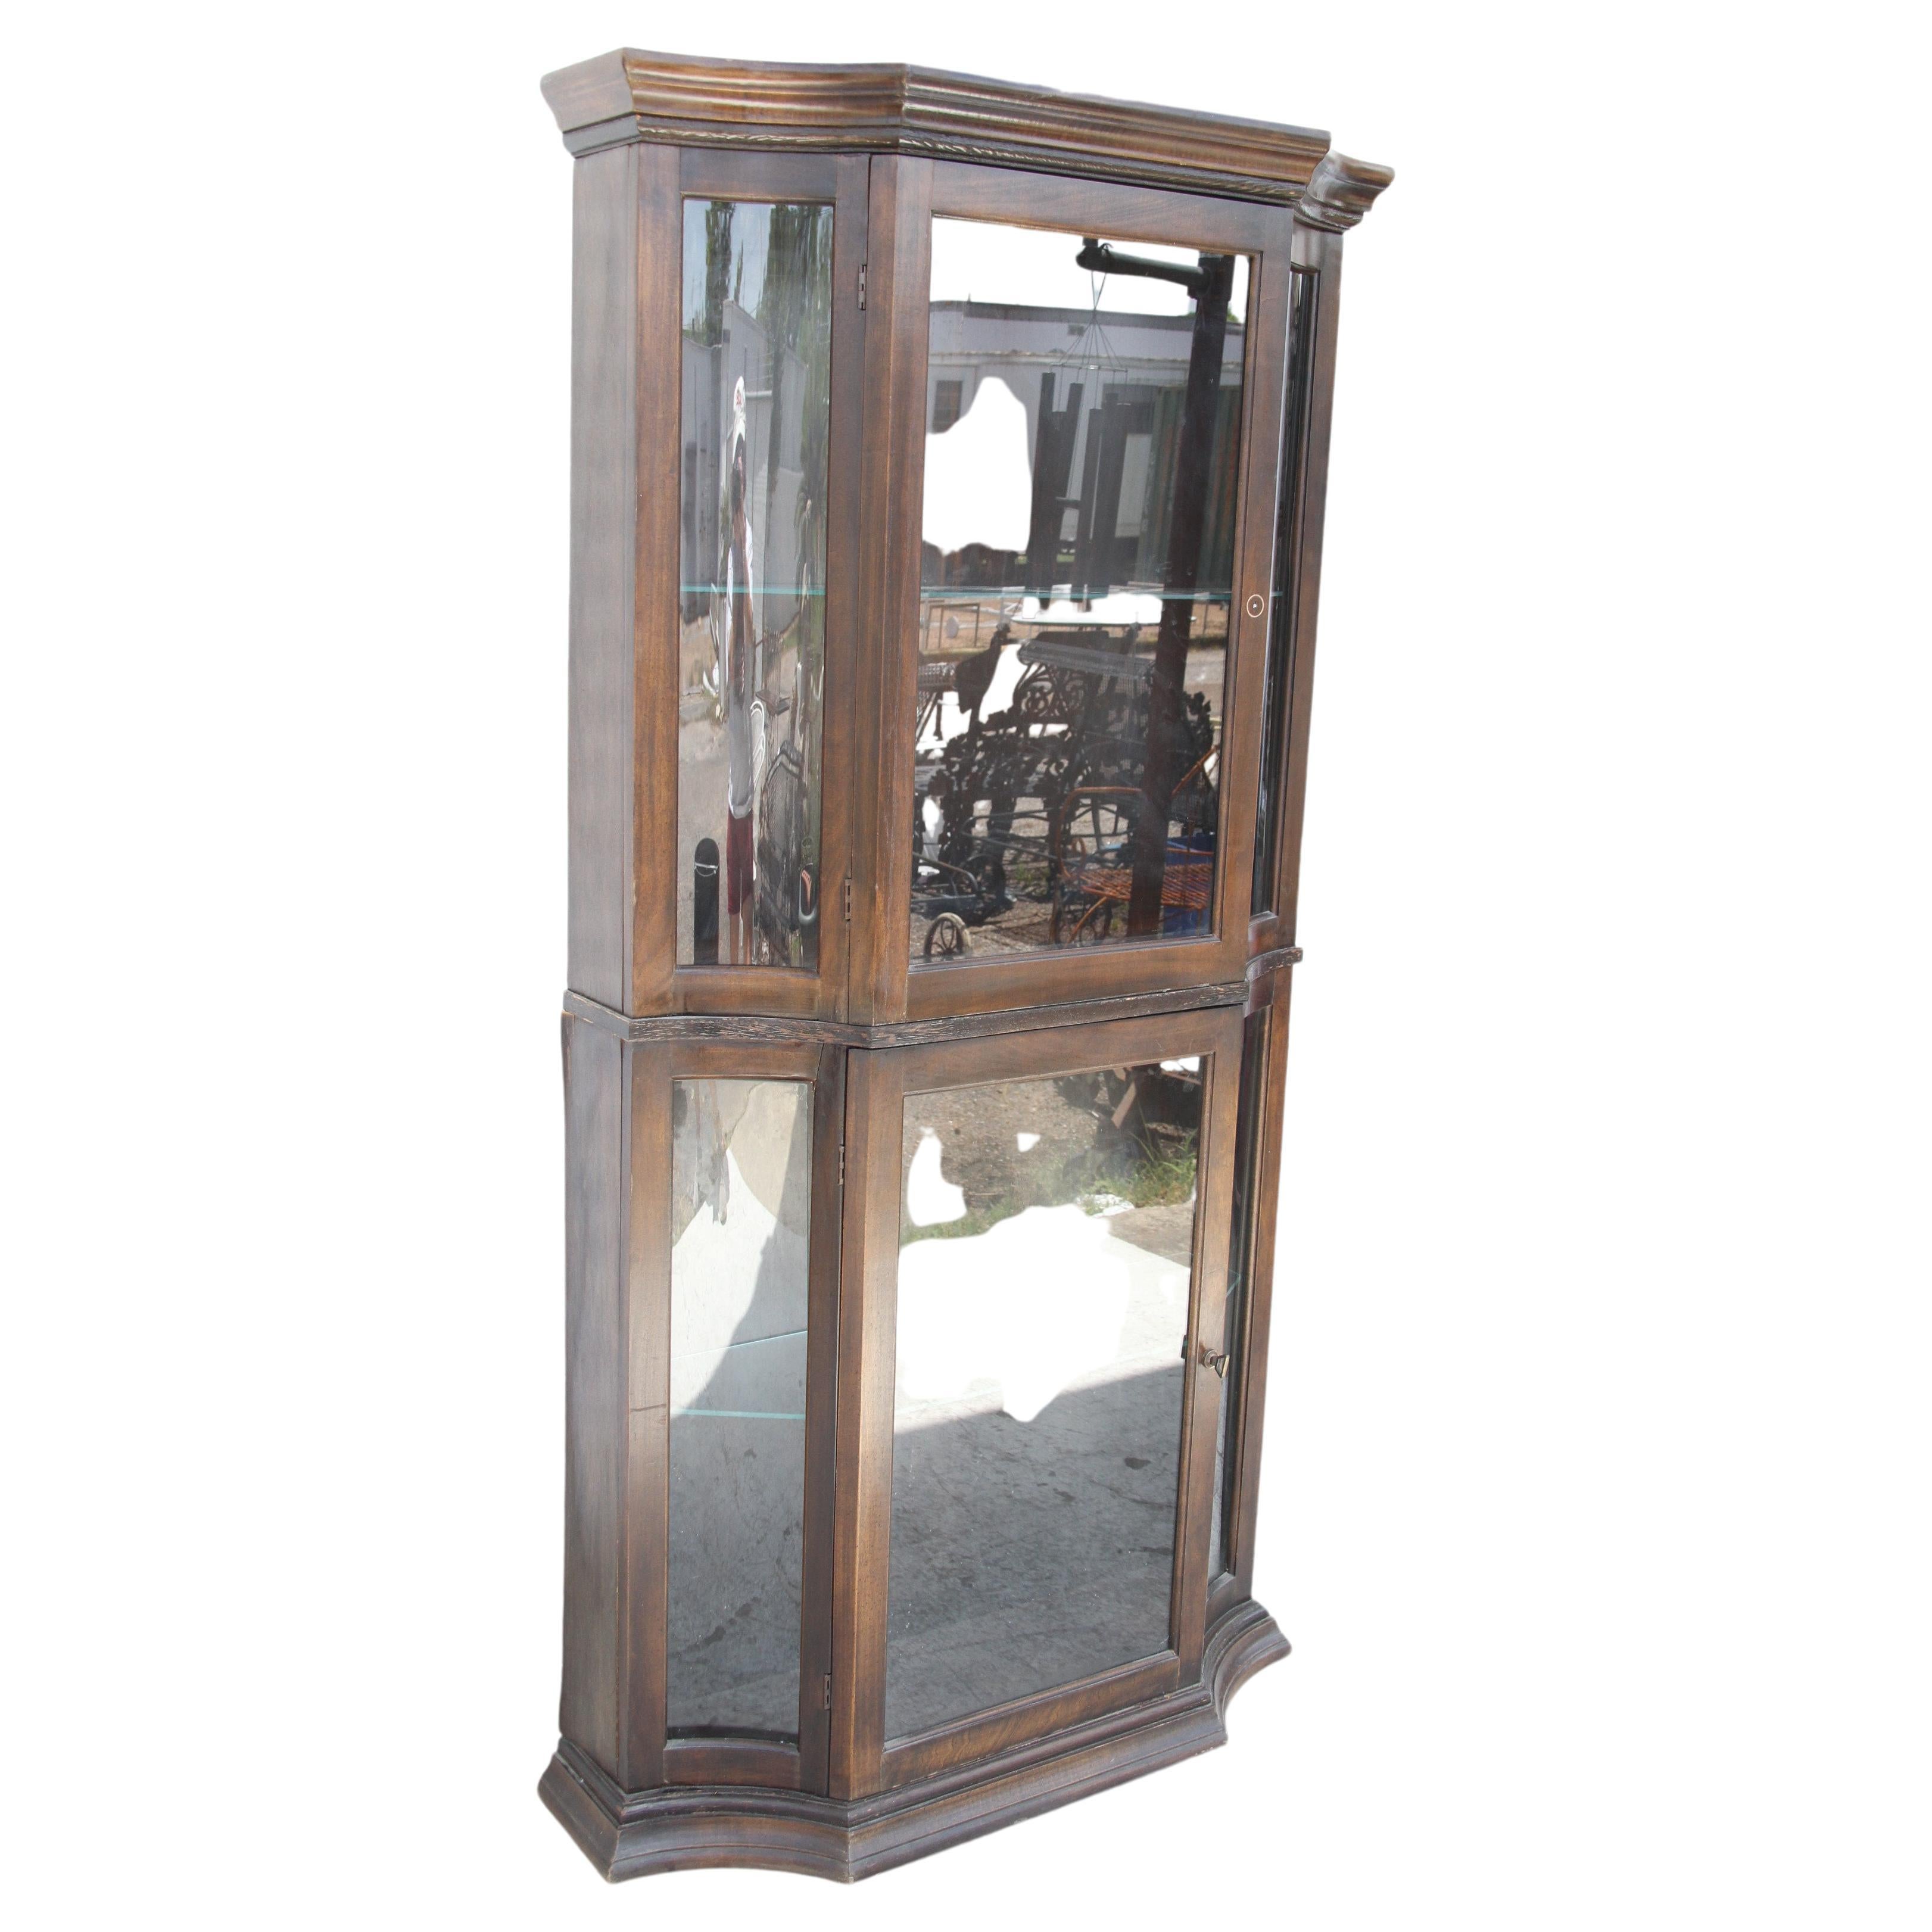 Regency China Display Cabinet by Philip Reinisch

A tall elegant glass display cabinet by Reinisch CO, Circa 1970s. Illuminated at top. 
Ample storage for collectibles with 3 shelves. 

34